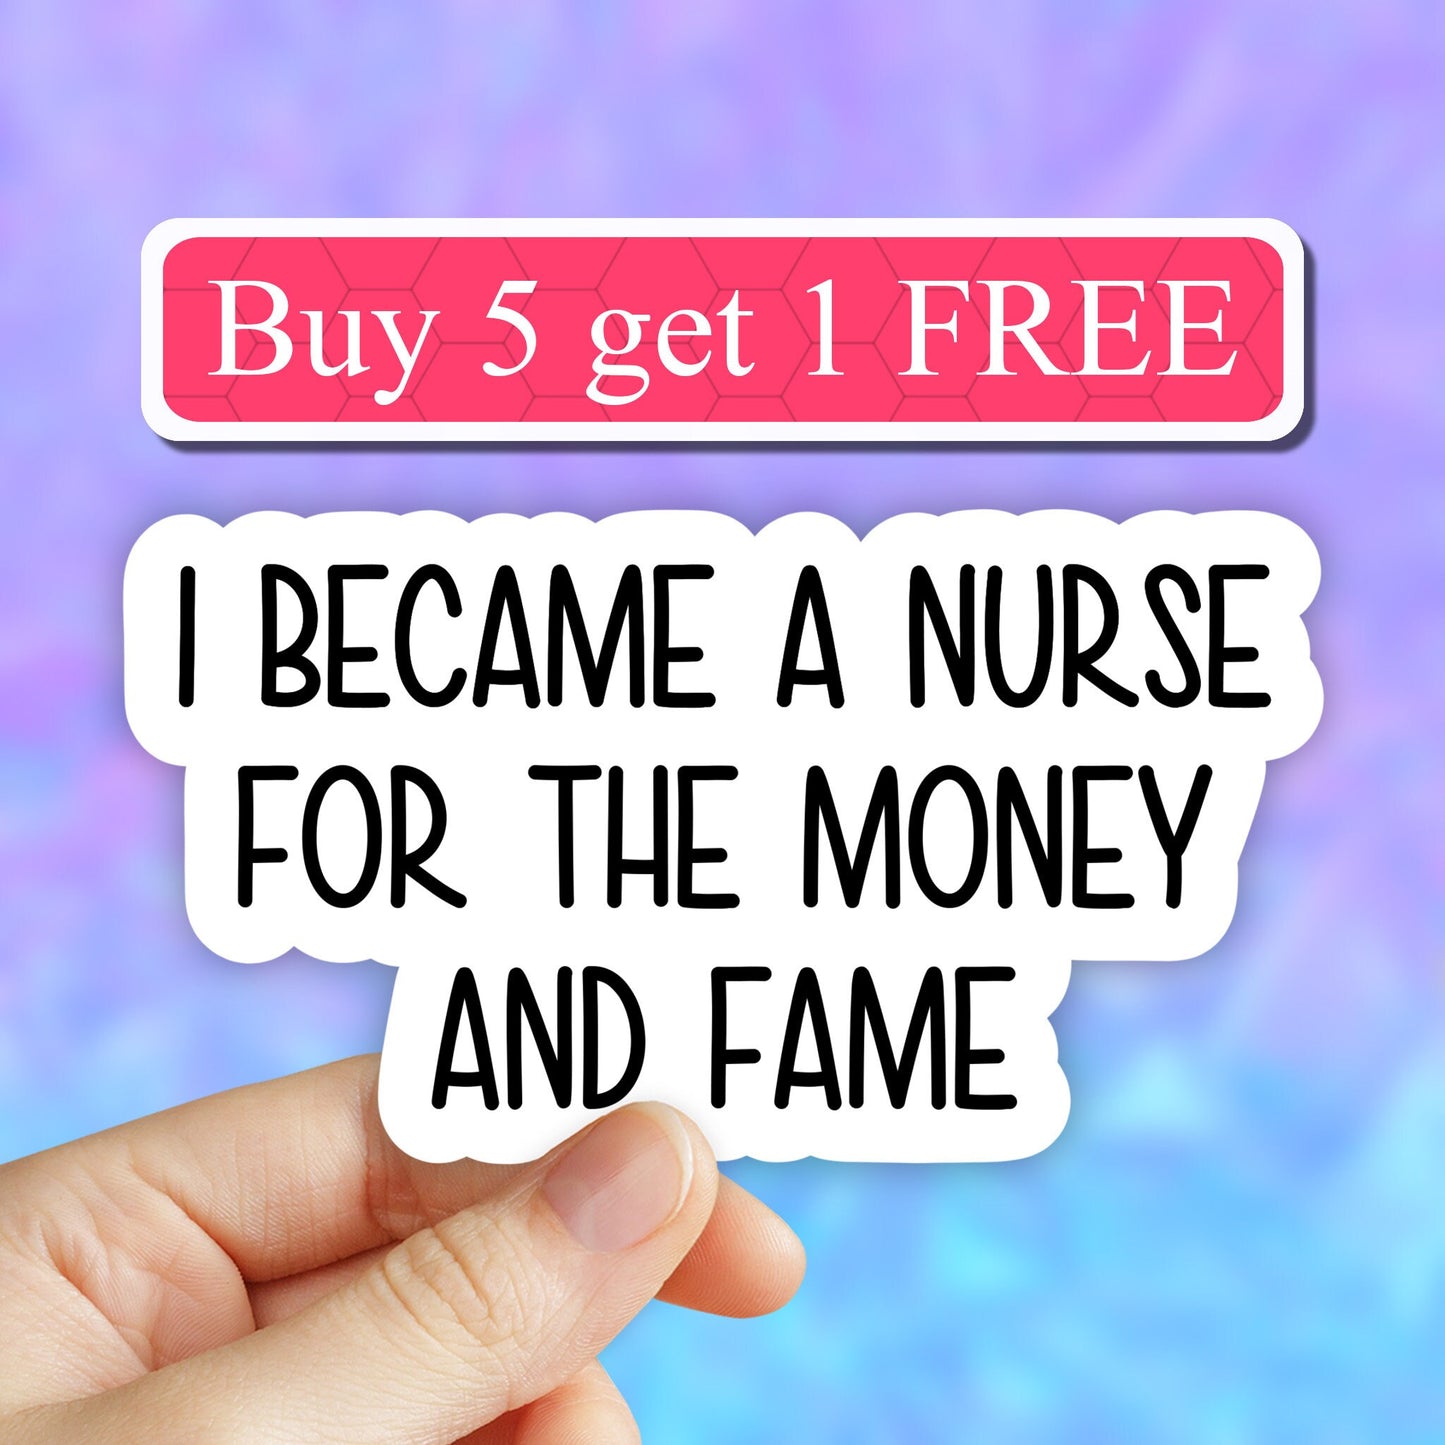 I became a nurse for the money and fame Nurse Sticker, Nurse Life Sticker, Nurse Stickers Laptop Decals, Popular Stickers, Water Bottle